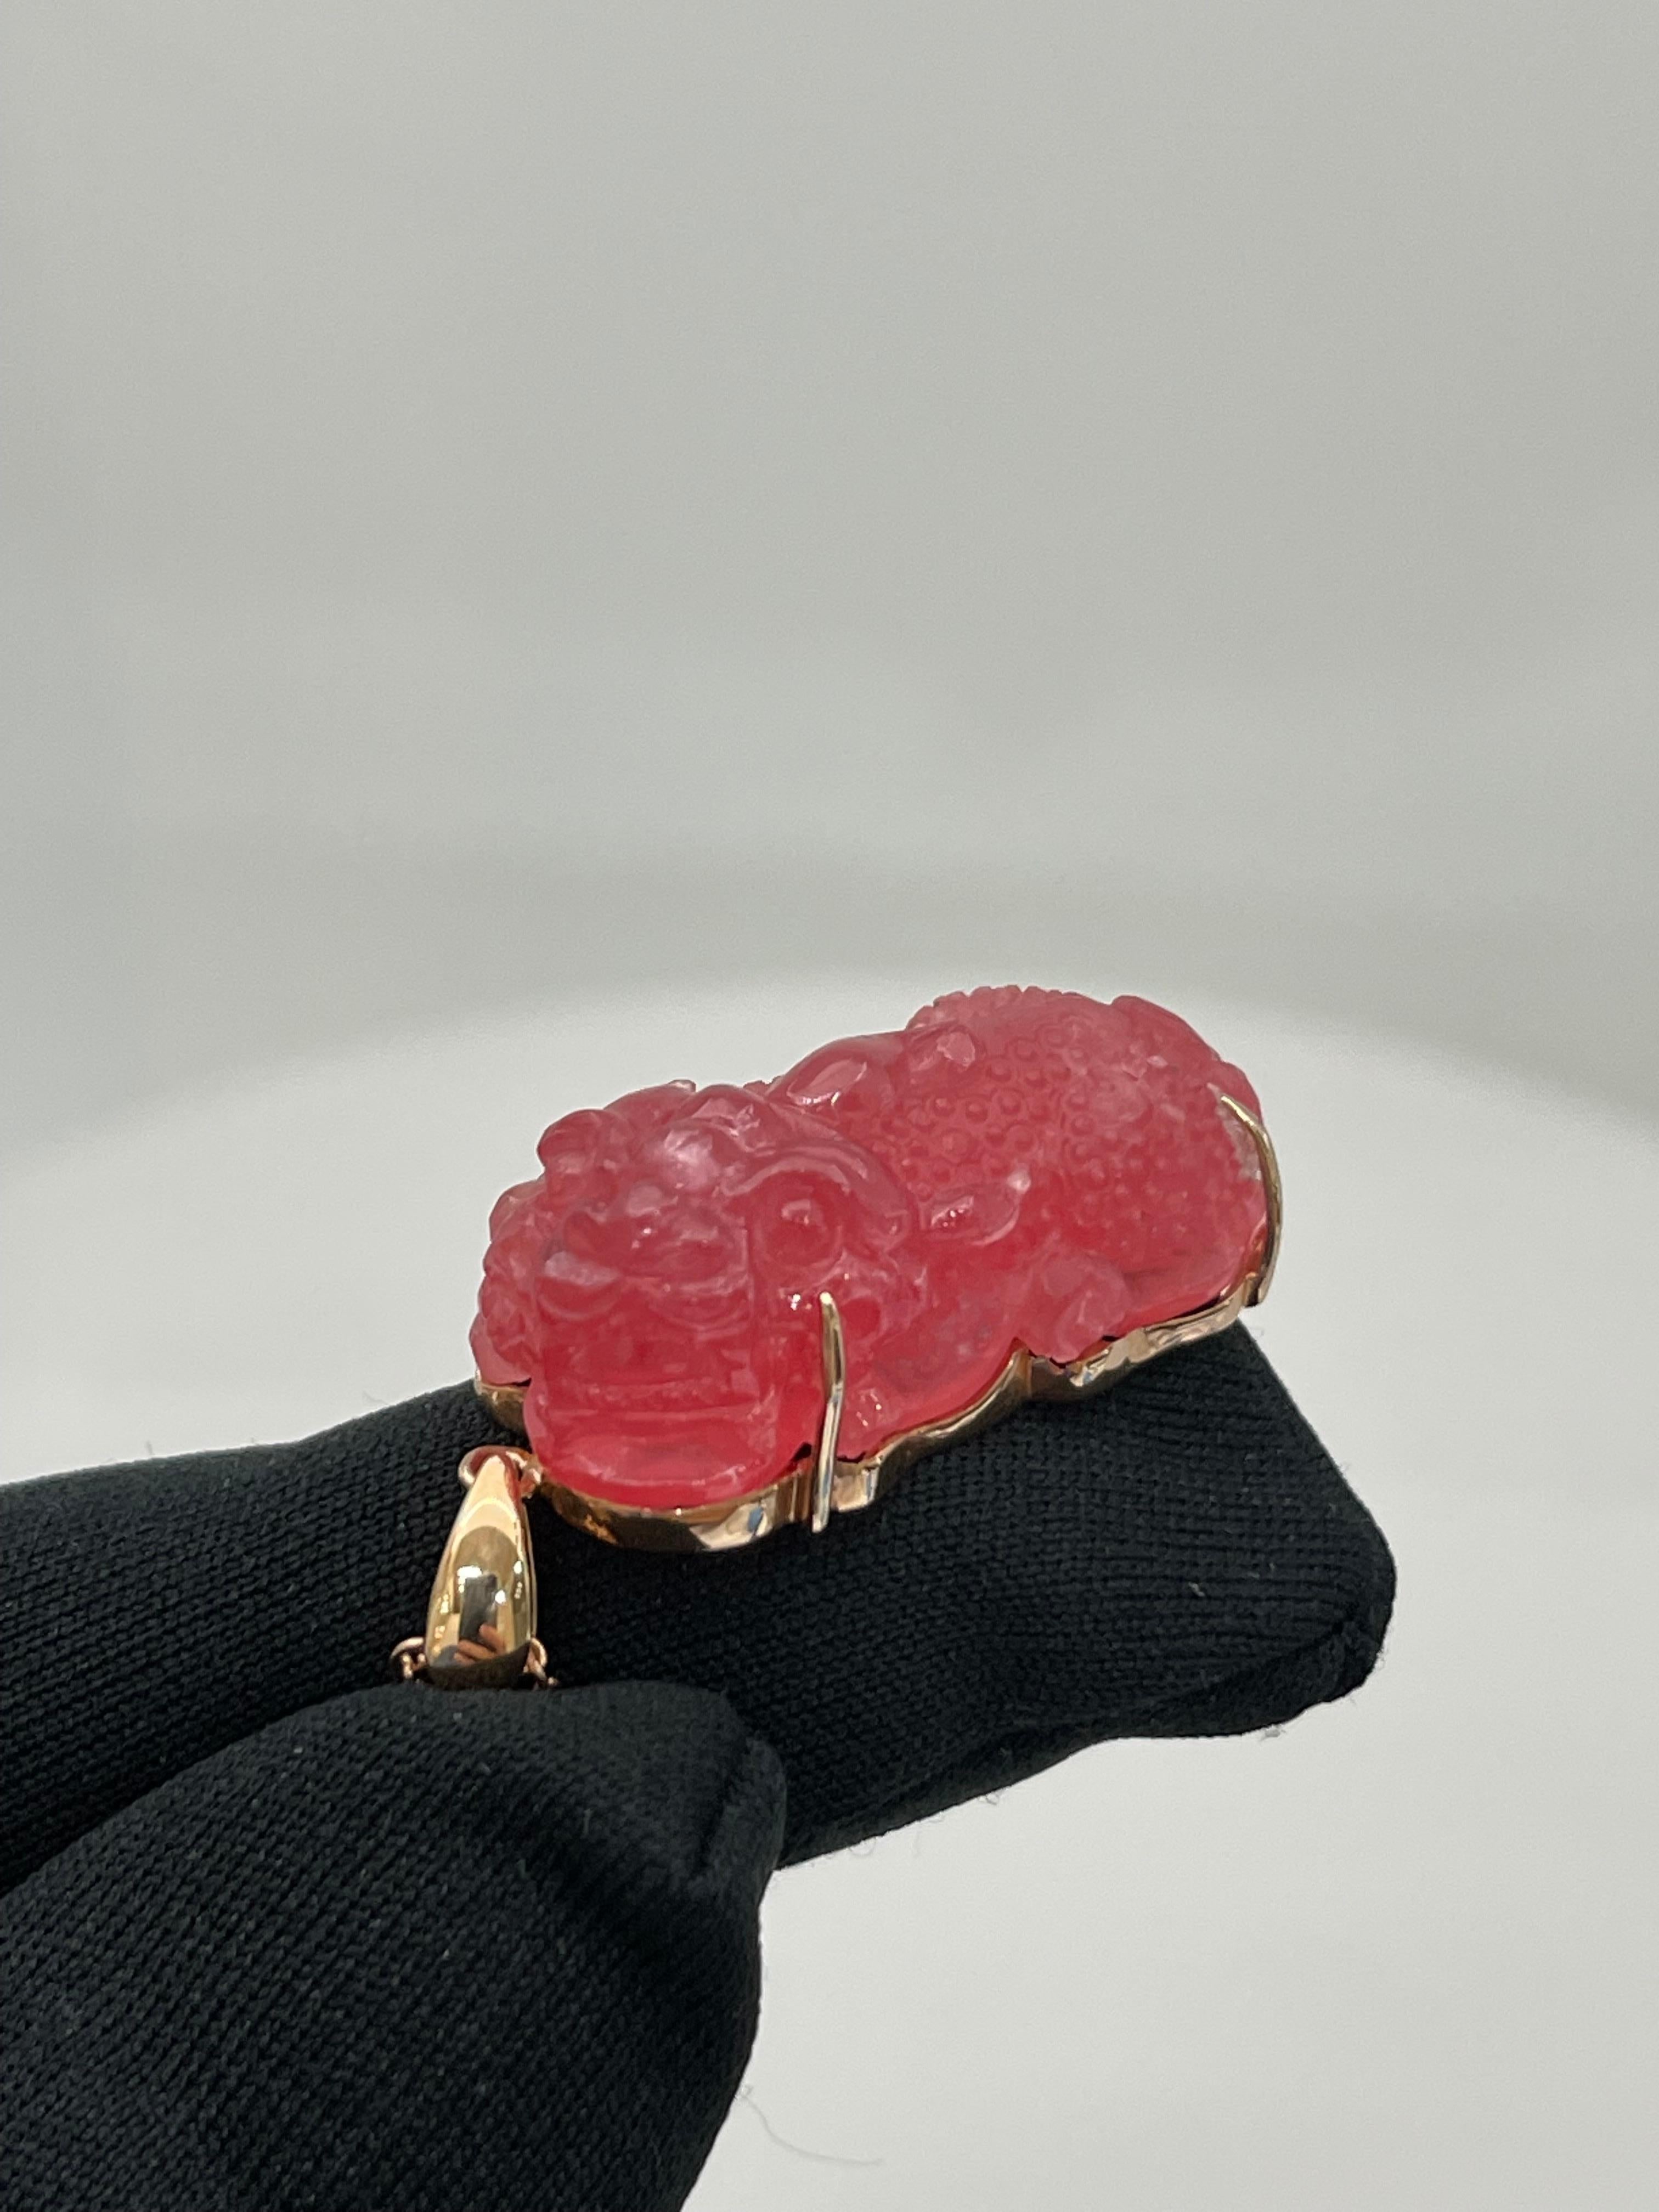 Rough Cut Certified Natural Rhodochrosite Mythical Beast Pendant, Exceptional Workmanship For Sale